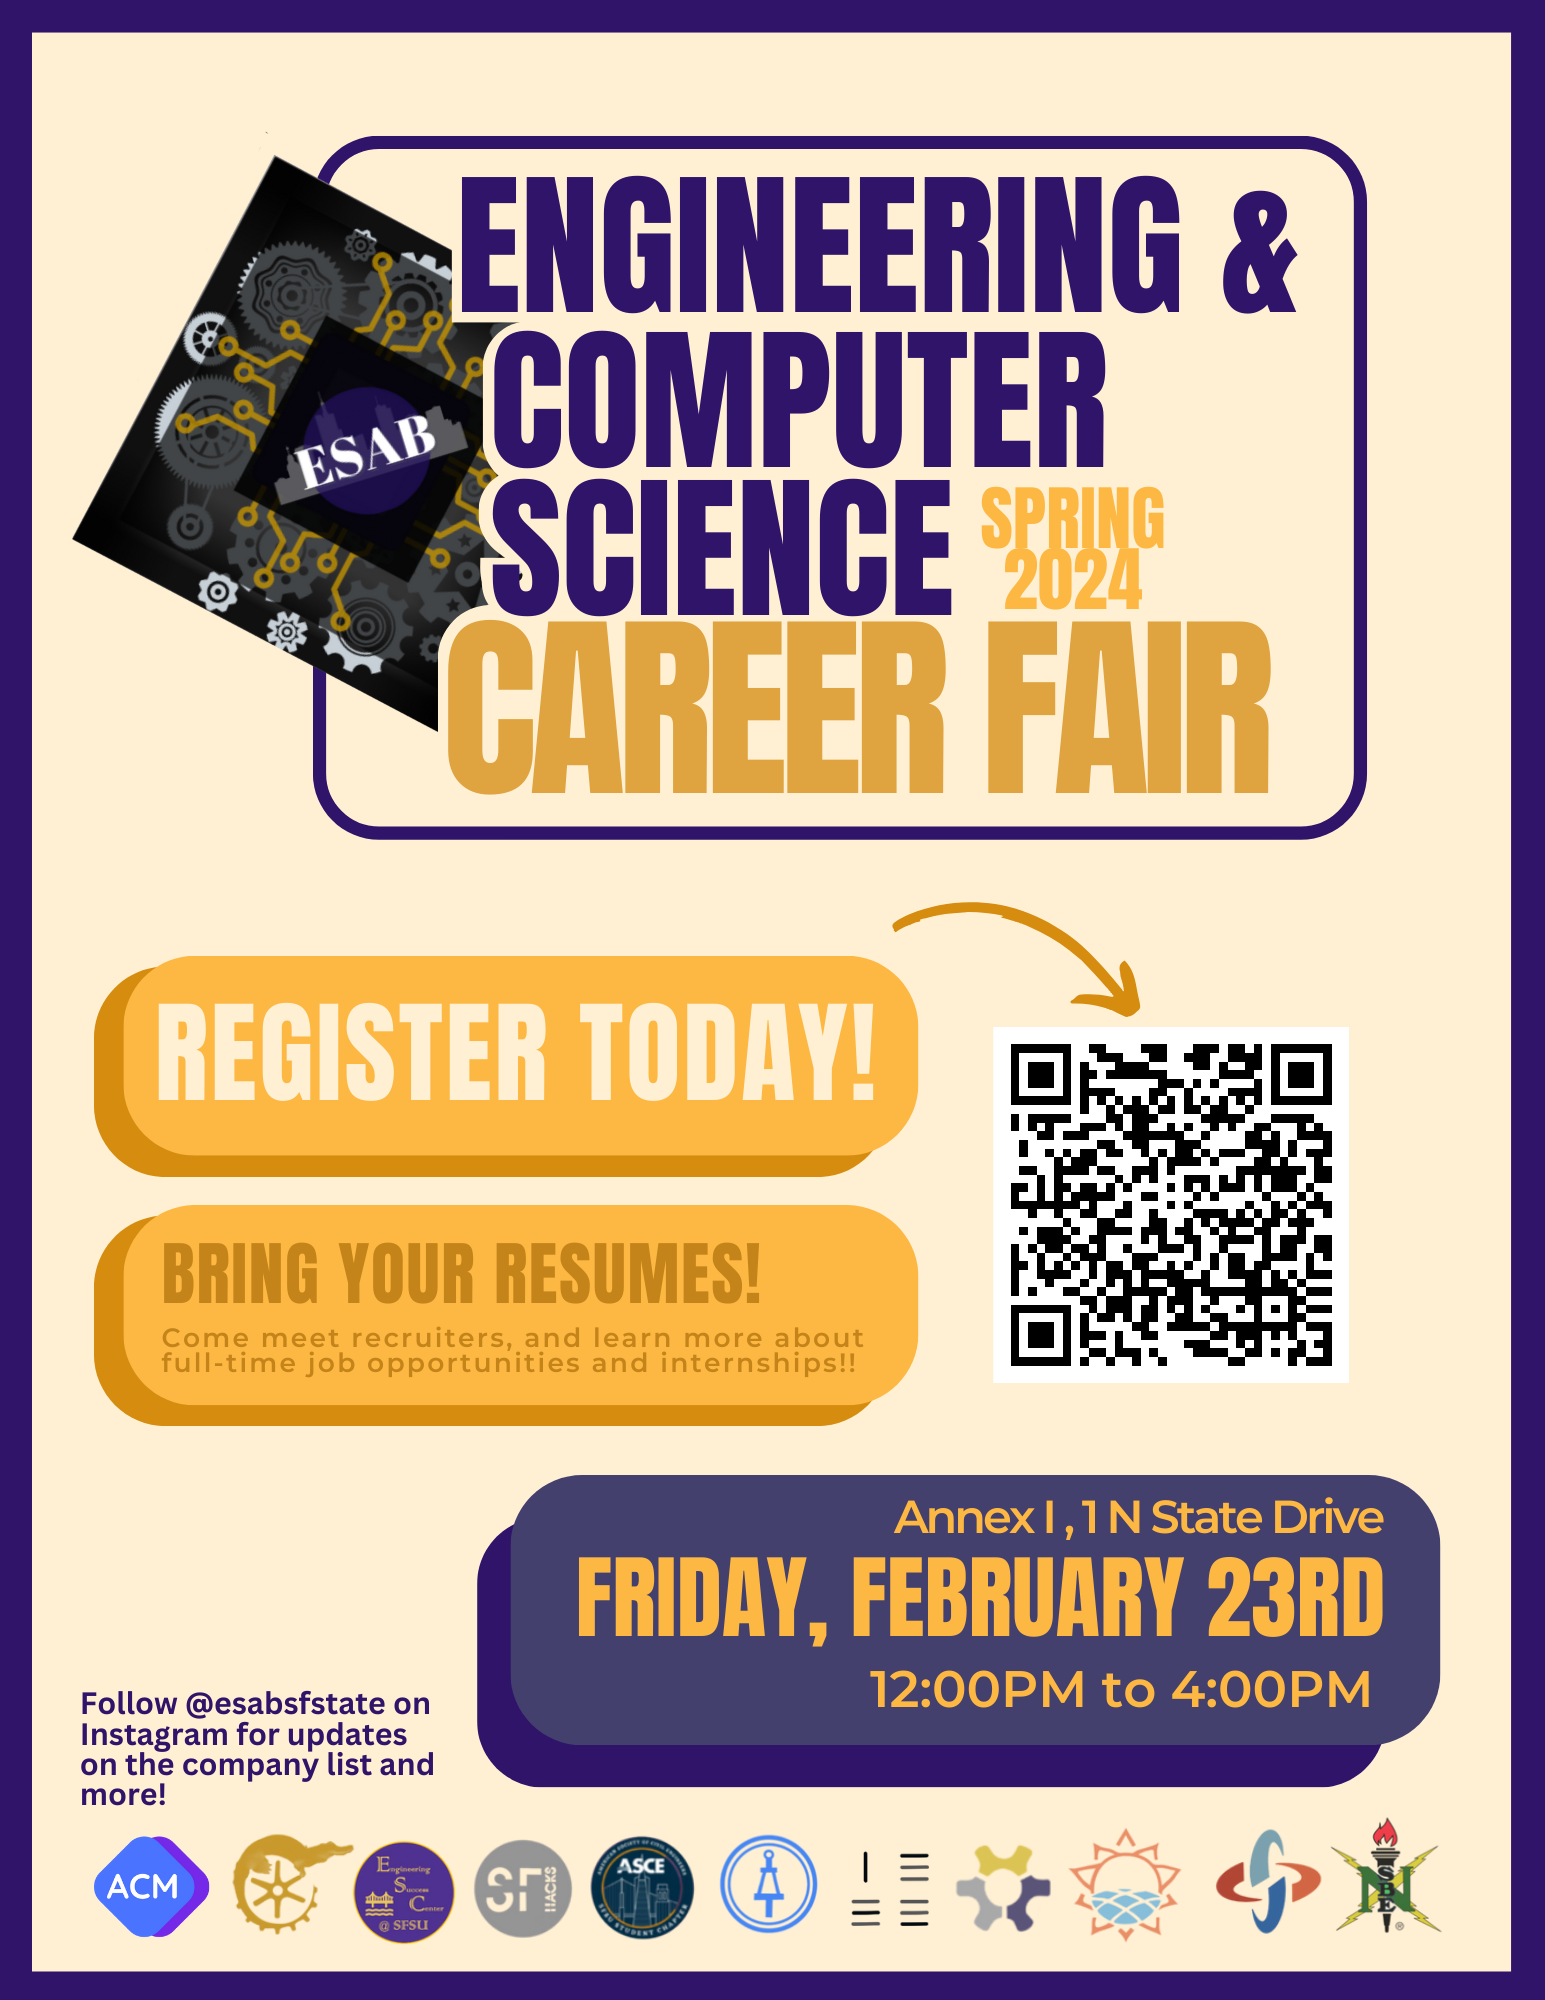 Engineering and Computer Science Career Fair SPring 2024